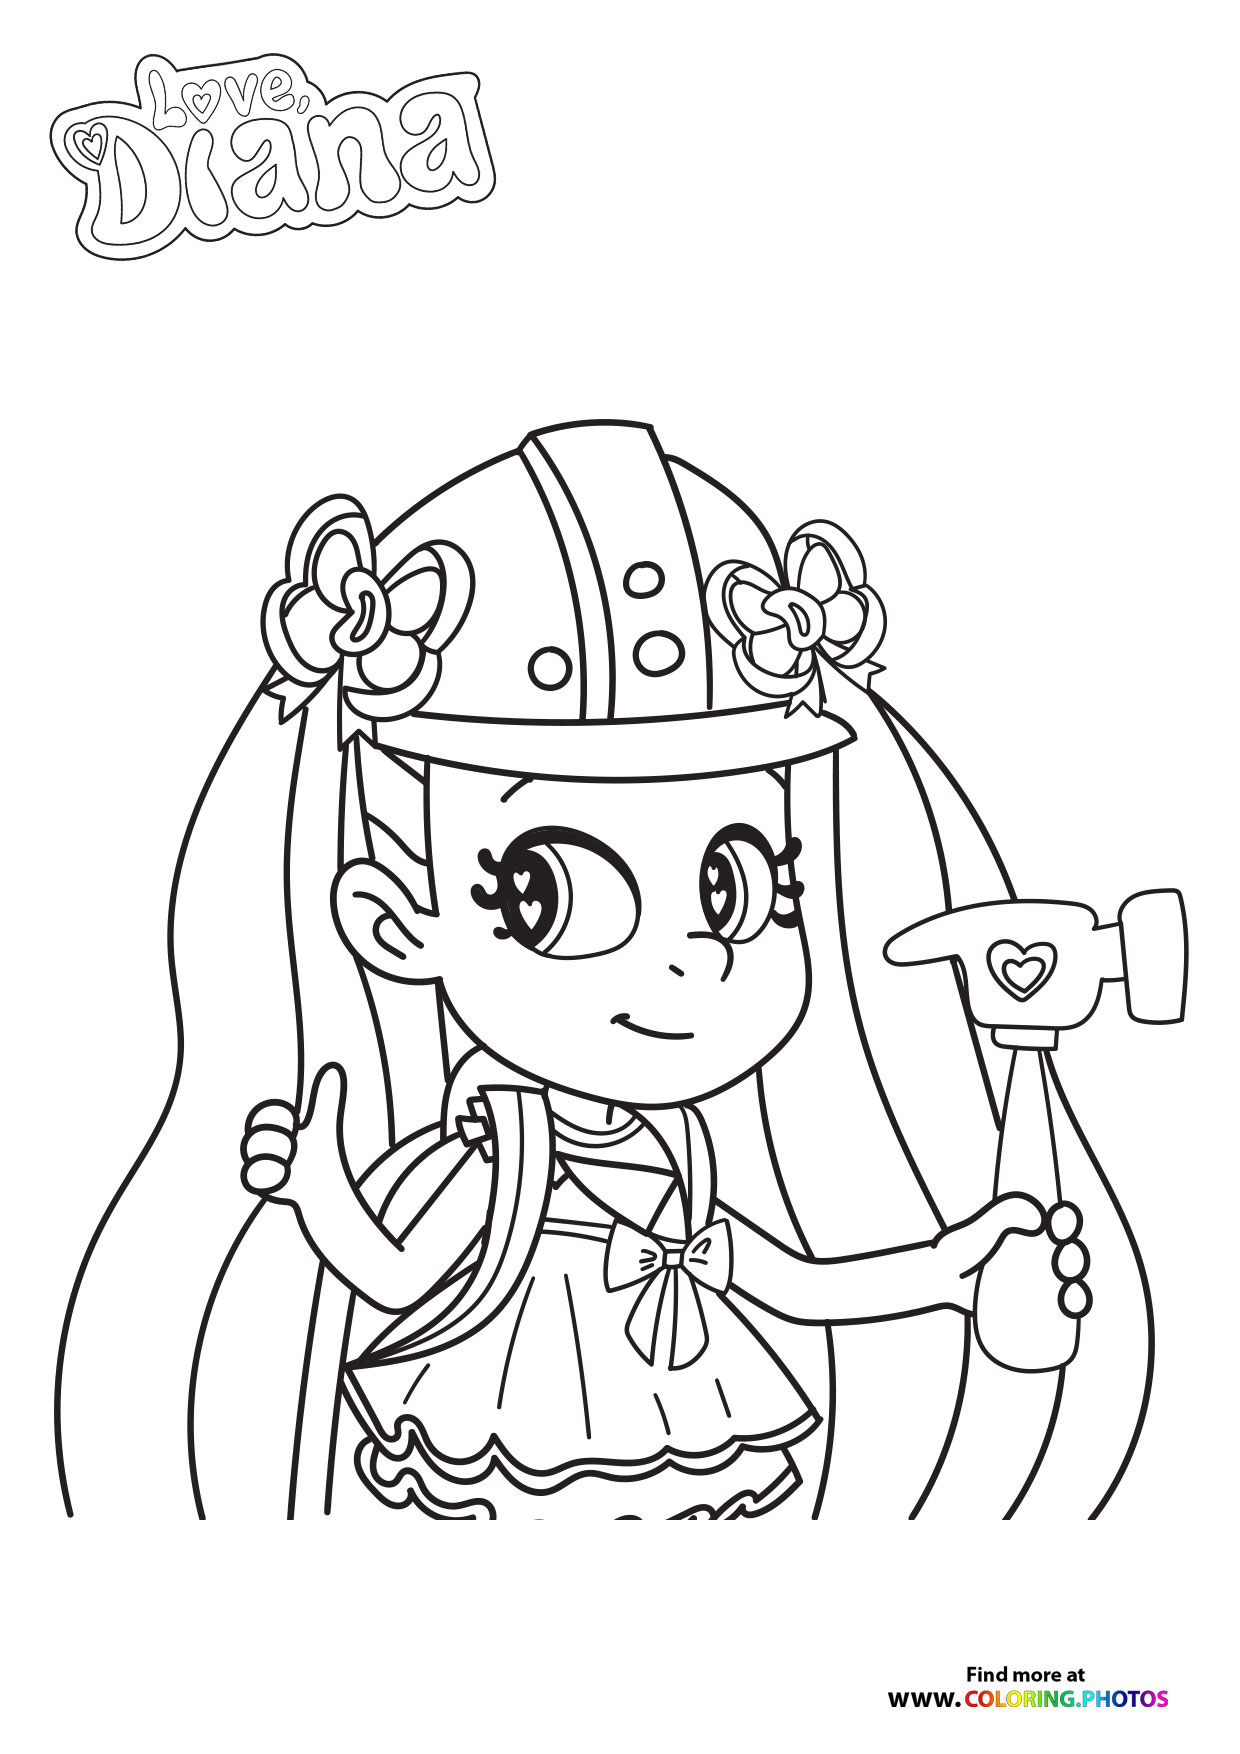 Love Diana - Coloring Pages for kids | 100% free print or download